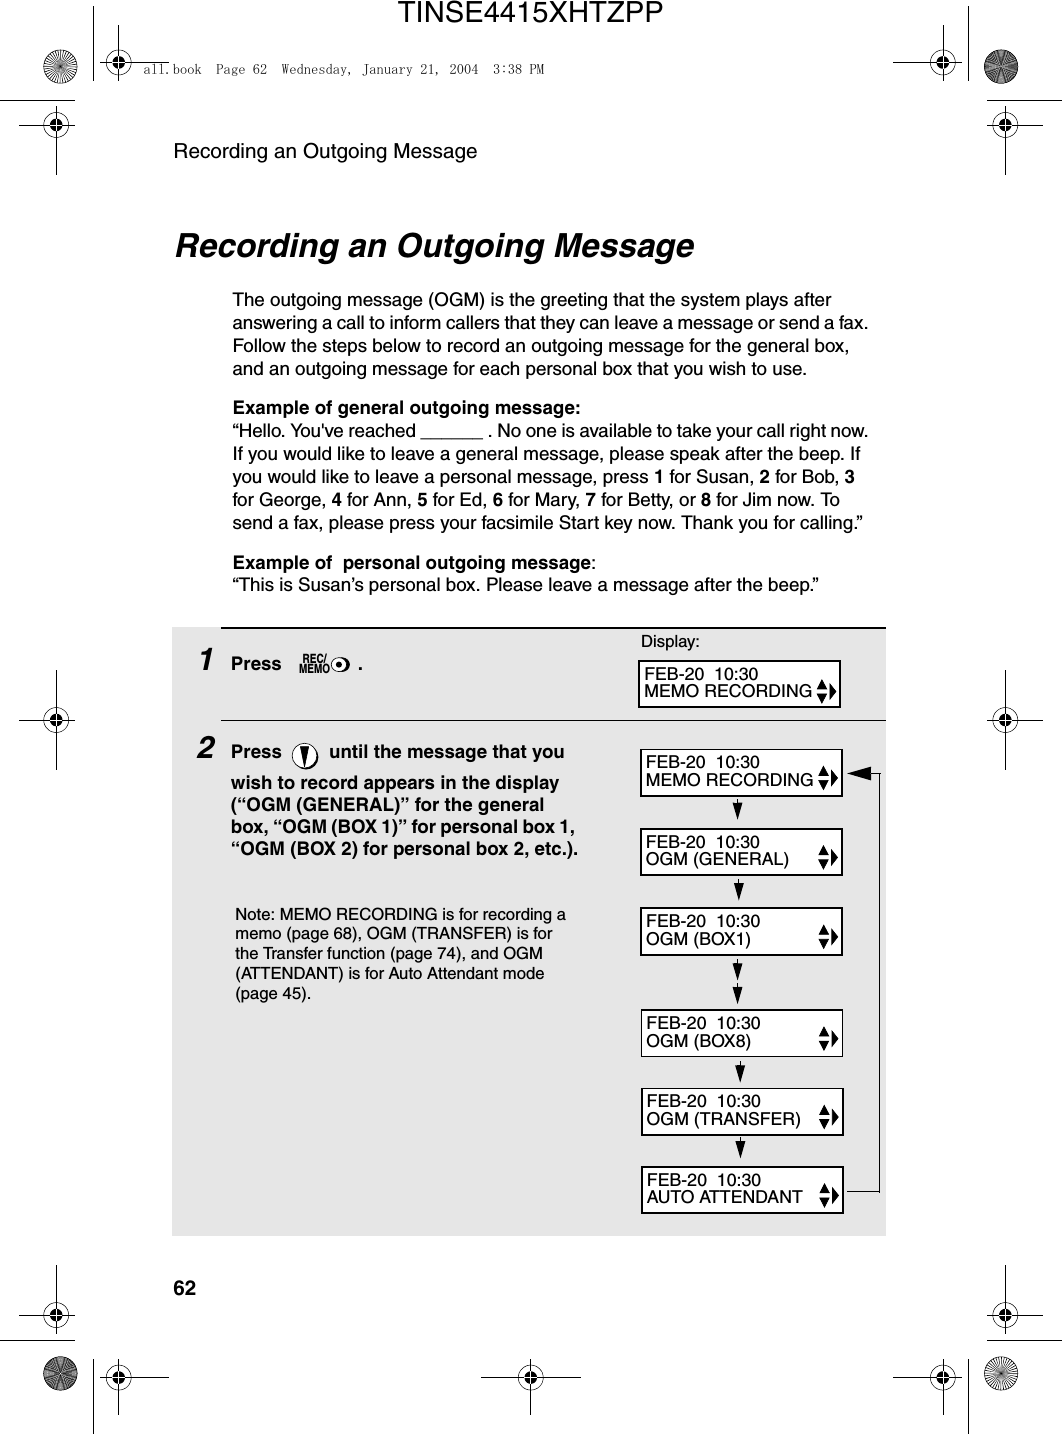 Recording an Outgoing Message62Recording an Outgoing MessageThe outgoing message (OGM) is the greeting that the system plays after answering a call to inform callers that they can leave a message or send a fax. Follow the steps below to record an outgoing message for the general box, and an outgoing message for each personal box that you wish to use.Example of general outgoing message:“Hello. You&apos;ve reached ______ . No one is available to take your call right now. If you would like to leave a general message, please speak after the beep. If you would like to leave a personal message, press 1 for Susan, 2 for Bob, 3 for George, 4 for Ann, 5 for Ed, 6 for Mary, 7 for Betty, or 8 for Jim now. To send a fax, please press your facsimile Start key now. Thank you for calling.”Example of  personal outgoing message:“This is Susan’s personal box. Please leave a message after the beep.”1Press .2Press   until the message that you wish to record appears in the display (“OGM (GENERAL)” for the general box, “OGM (BOX 1)” for personal box 1, “OGM (BOX 2) for personal box 2, etc.).REC/MEMODisplay:FEB-20  10:30MEMO RECORDINGFEB-20  10:30AUTO ATTENDANTFEB-20  10:30OGM (TRANSFER)FEB-20  10:30OGM (BOX8)FEB-20  10:30OGM (BOX1)FEB-20  10:30OGM (GENERAL)FEB-20  10:30MEMO RECORDINGNote: MEMO RECORDING is for recording a memo (page 68), OGM (TRANSFER) is for the Transfer function (page 74), and OGM (ATTENDANT) is for Auto Attendant mode (page 45).all.book  Page 62  Wednesday, January 21, 2004  3:38 PMTINSE4415XHTZPP